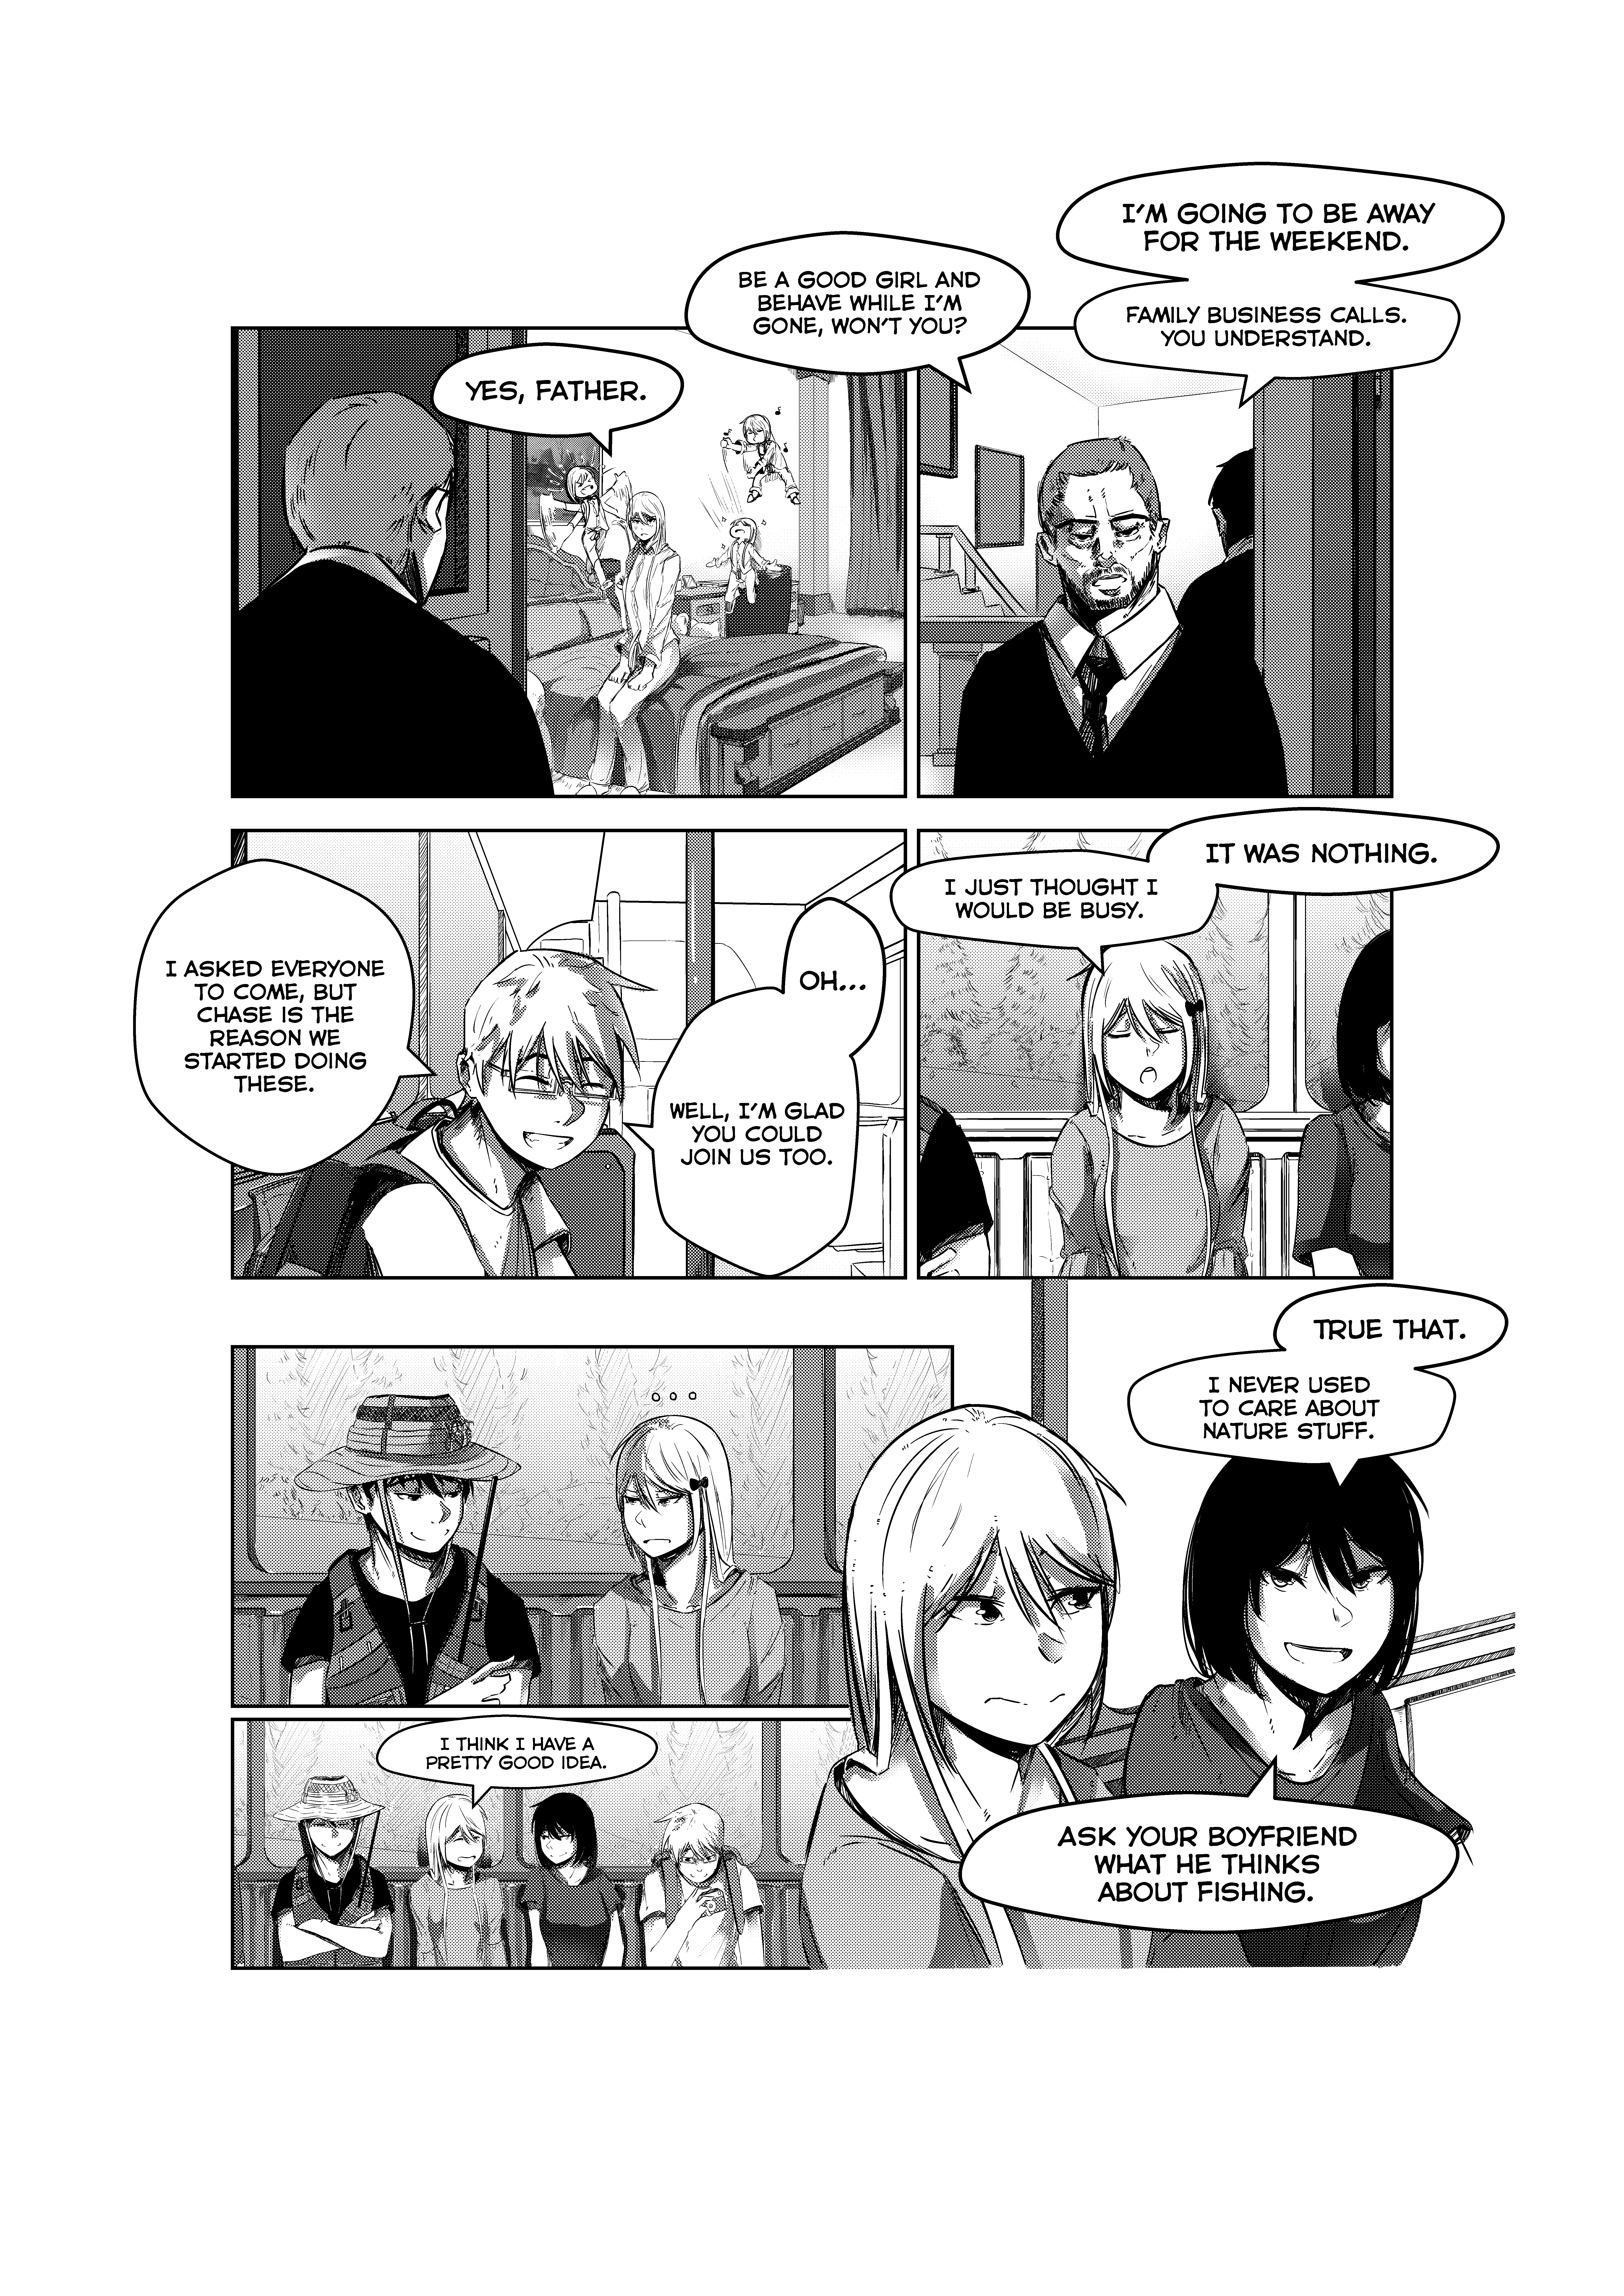 Opposites In Disguise - 10 page 4